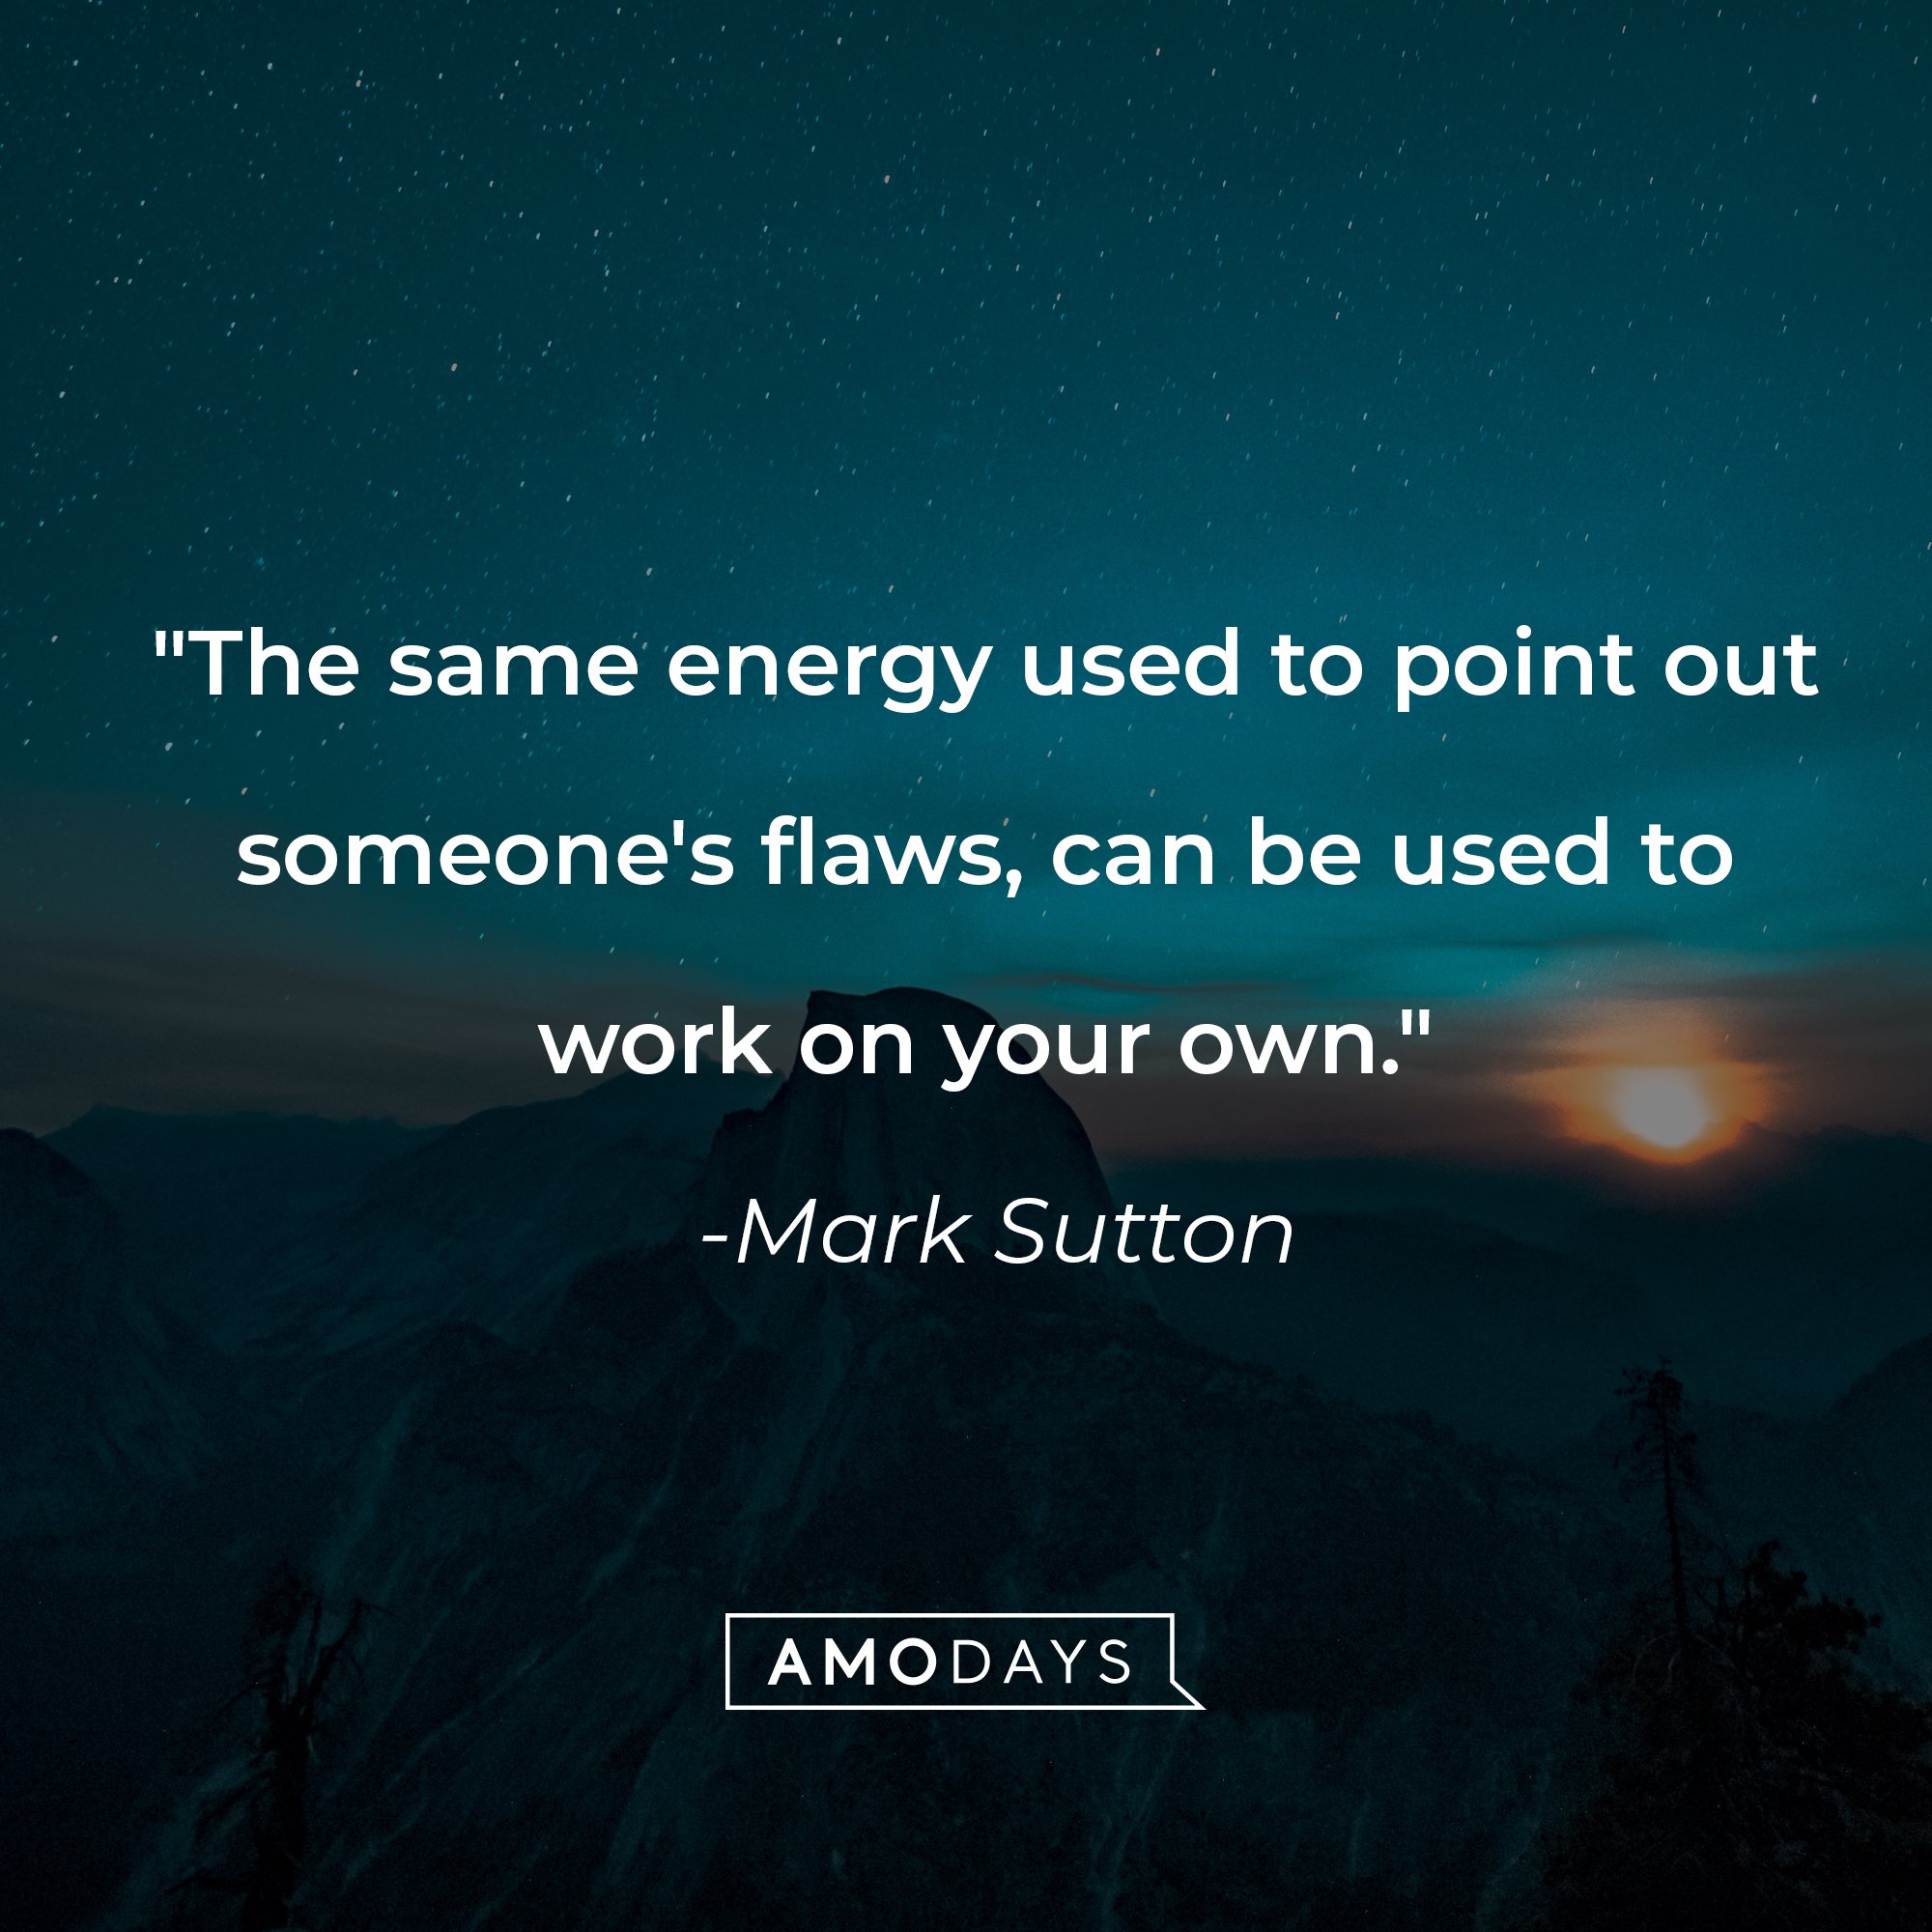 Mark Sutton's quote: "The same energy used to point out someone's flaws, can be used to work on your own." | Image: AmoDays